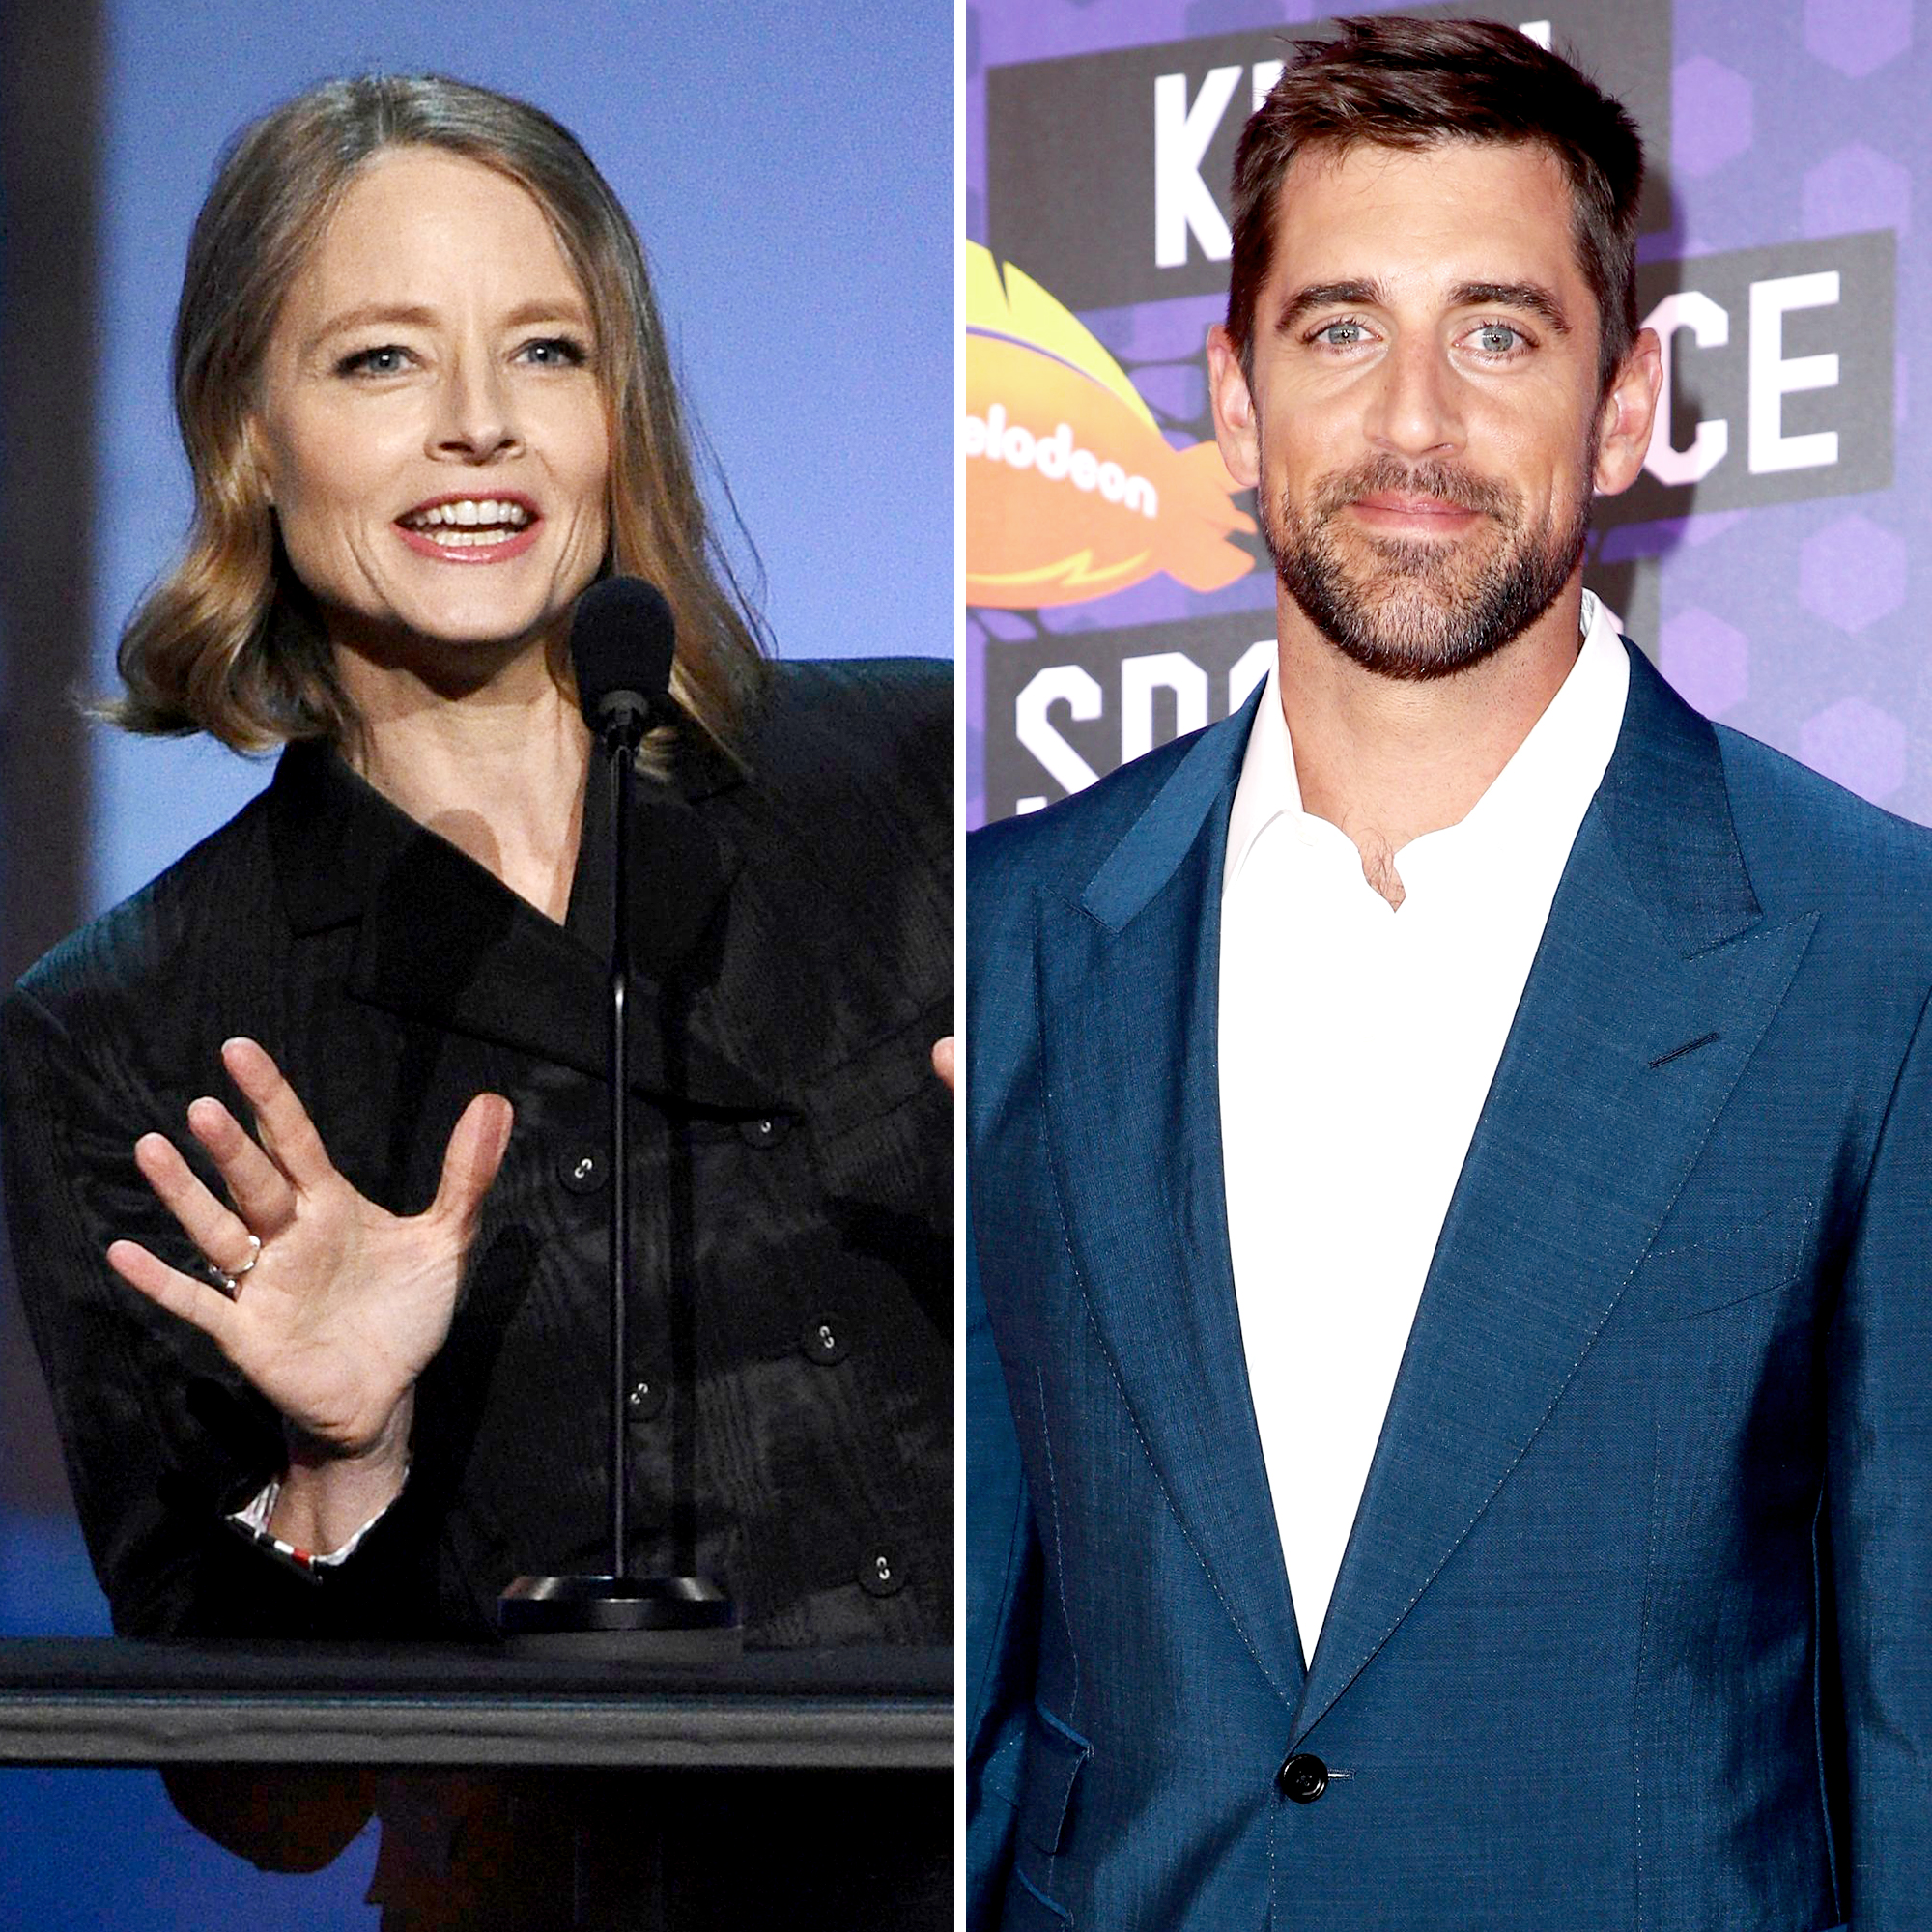 Jodie Foster Porn Captions - Jodie Foster Says She Doesn't Know Aaron Rodgers After Shout-Out